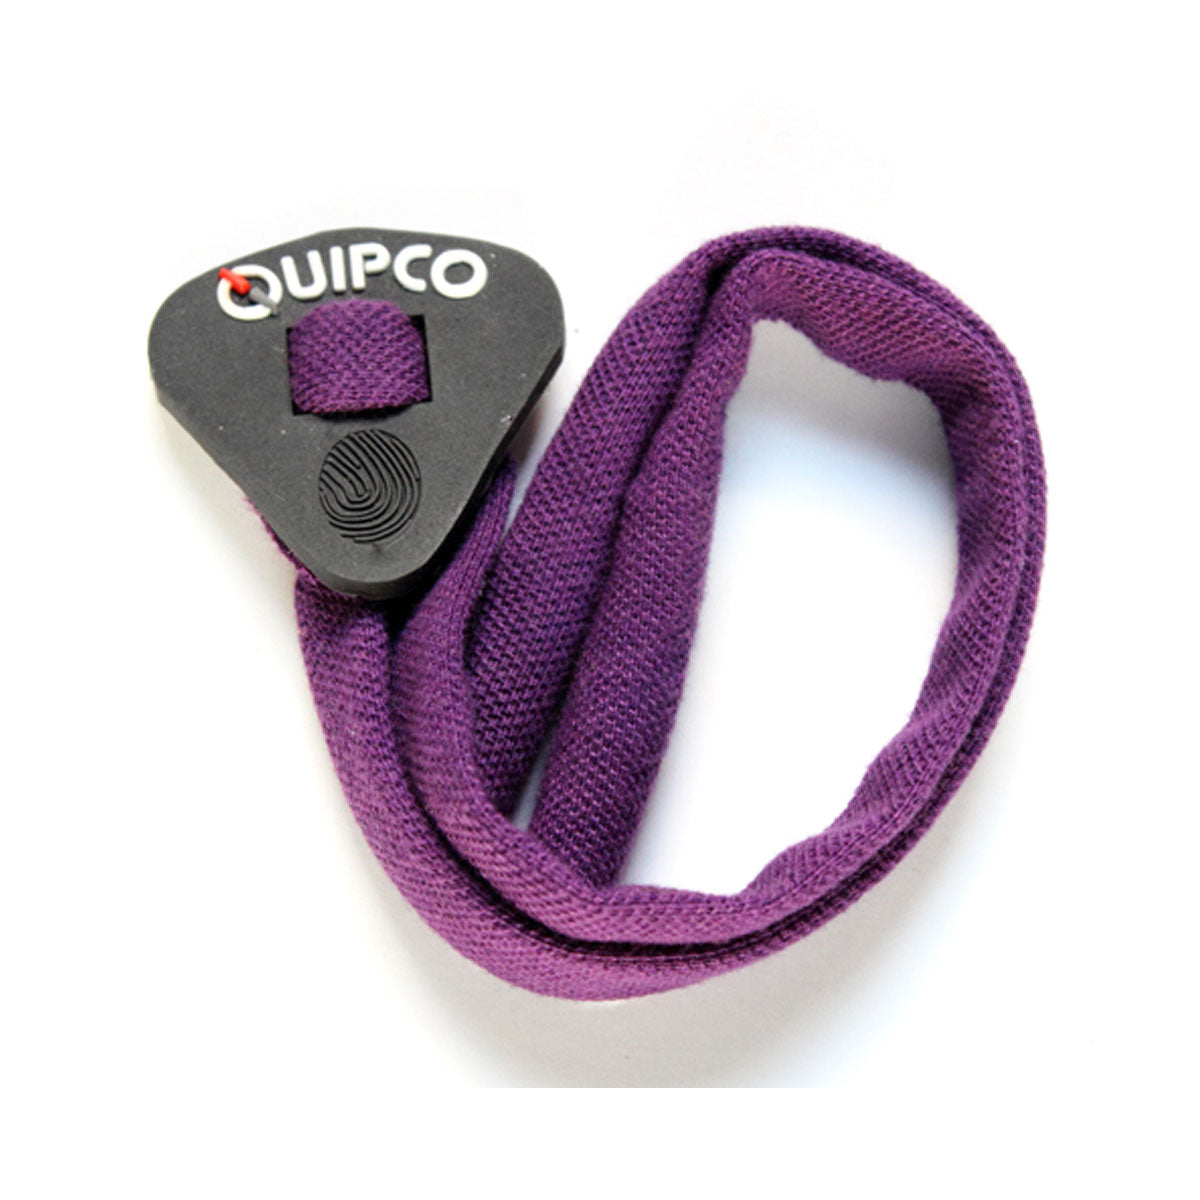 Quipco: Eyesecure Goggle Band - Purple 4